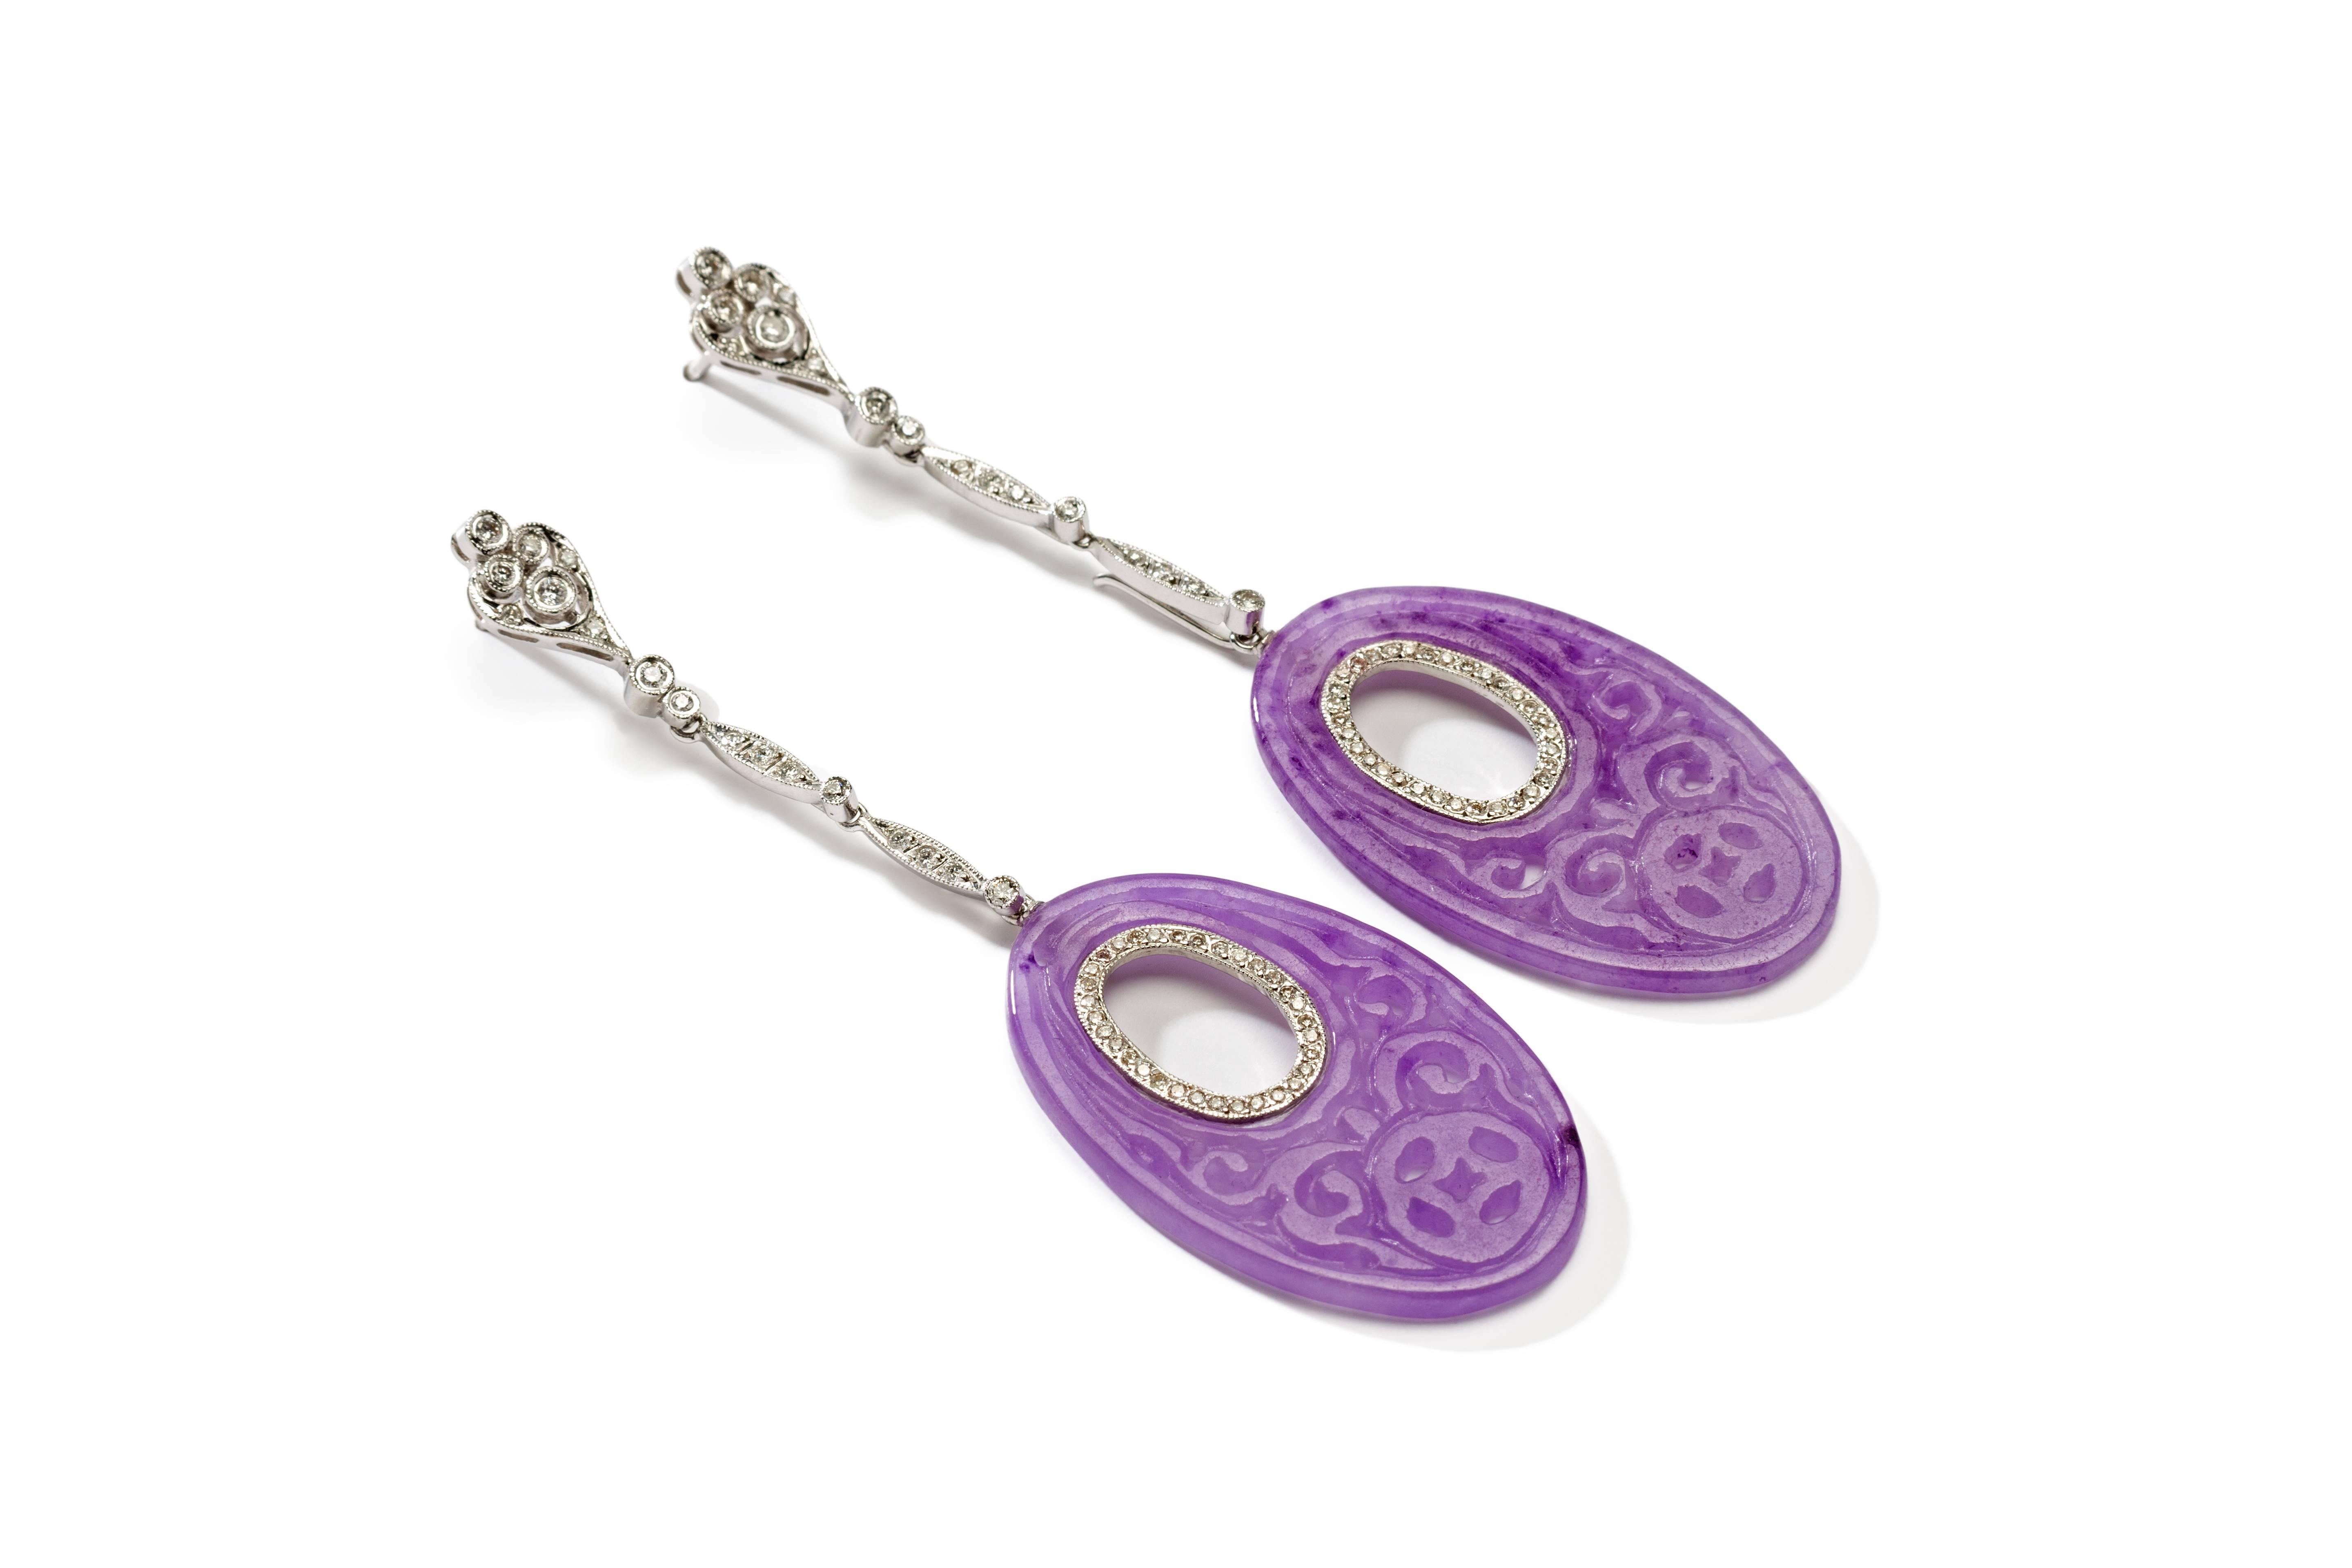 With flexible rod links, each set with 17 brilliant-cut diamonds weighing totally 0,30 carats SI, wesselton. Suspending a detachable openworked carved purple jade disc each with inlaid diamond ring, set with 32 brilliant-cut diamonds weighing total